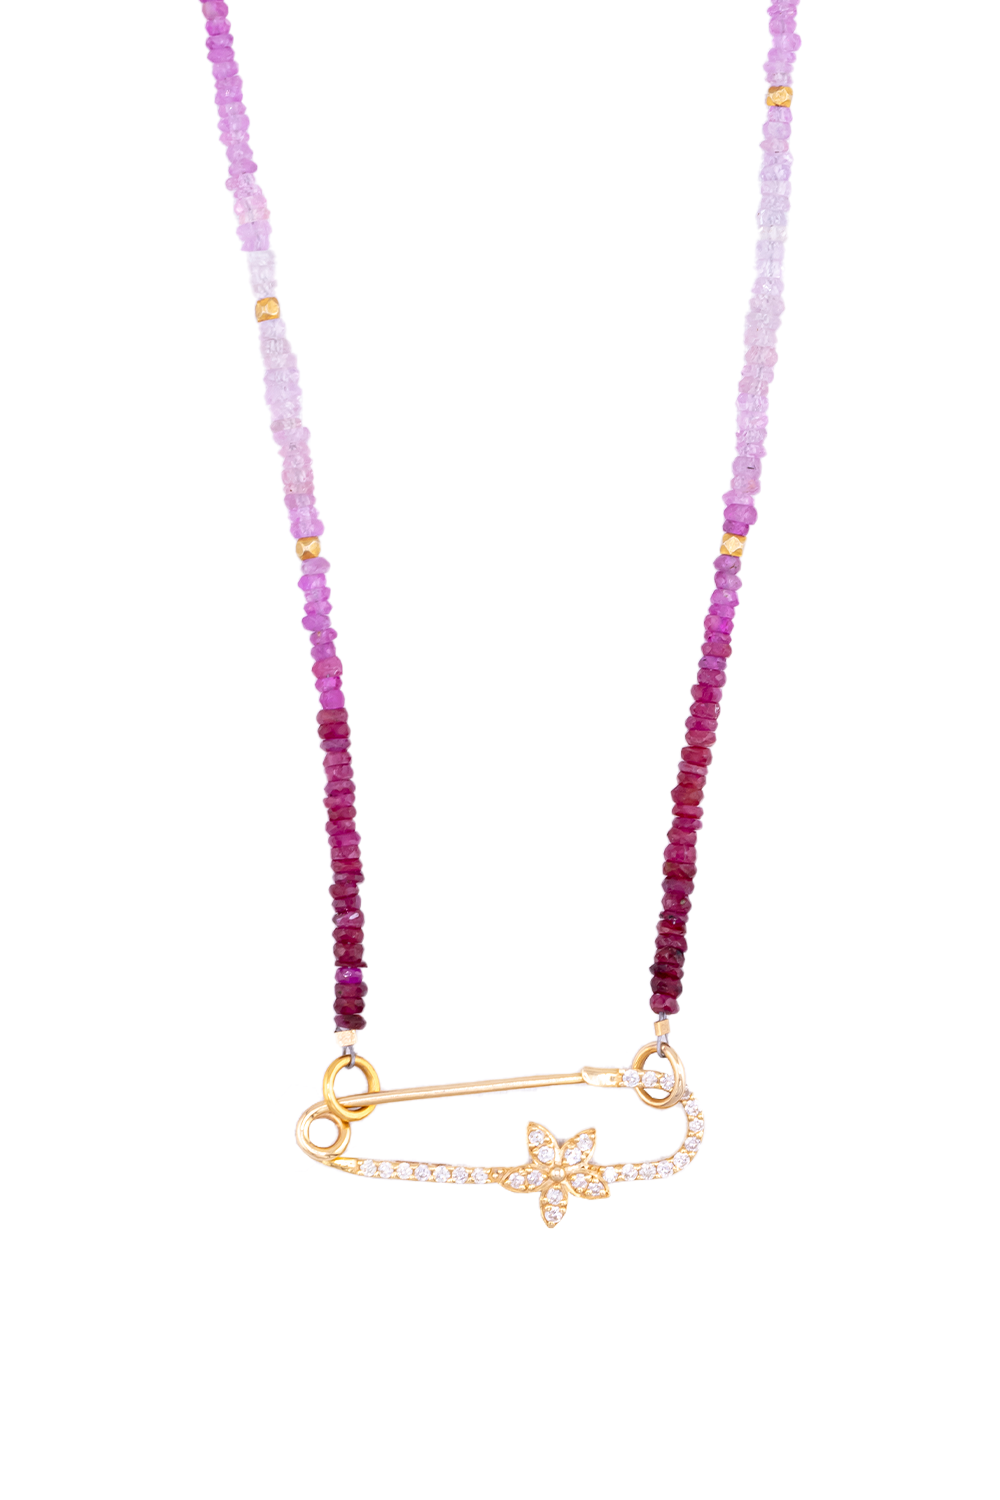 Ombre Rubies, Gold Beads, Diamond Flower Safety Pin Necklace